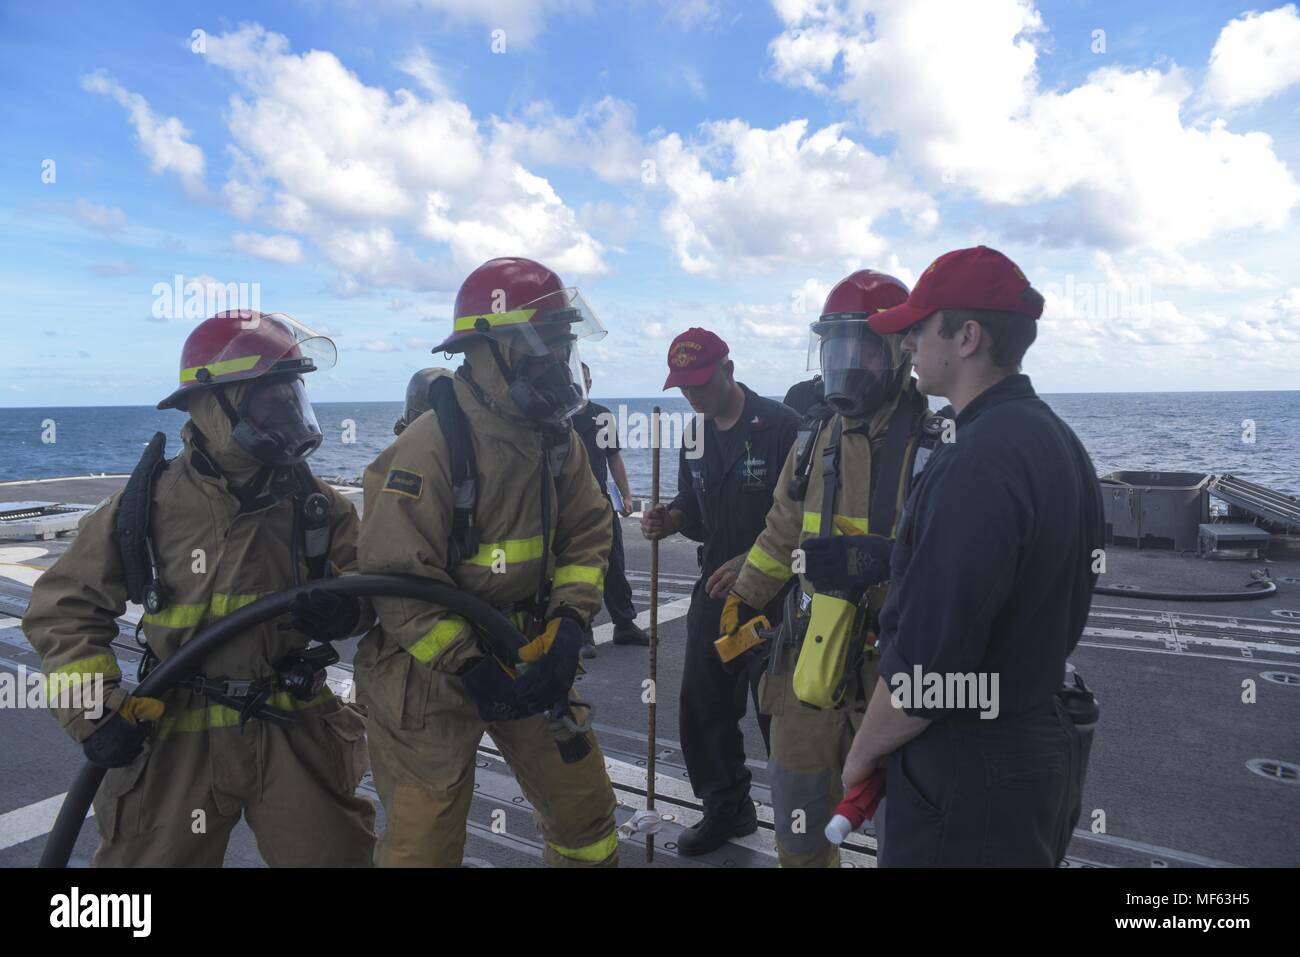 171021-N-DO281-109 ATLANTIC OCEAN (Oct. 21, 2017) Sailors combat a fire during a hanger fire drill, aboard the guided-missile cruiser USS Monterey (CG 61), October 21, 2017. Monterey is deployed in support of maritime security operations in the U.S. fifth and sixth fleet area of operations (U.S. Navy photo by Mass Communication Specialist Seaman Trey Fowler). () Stock Photo